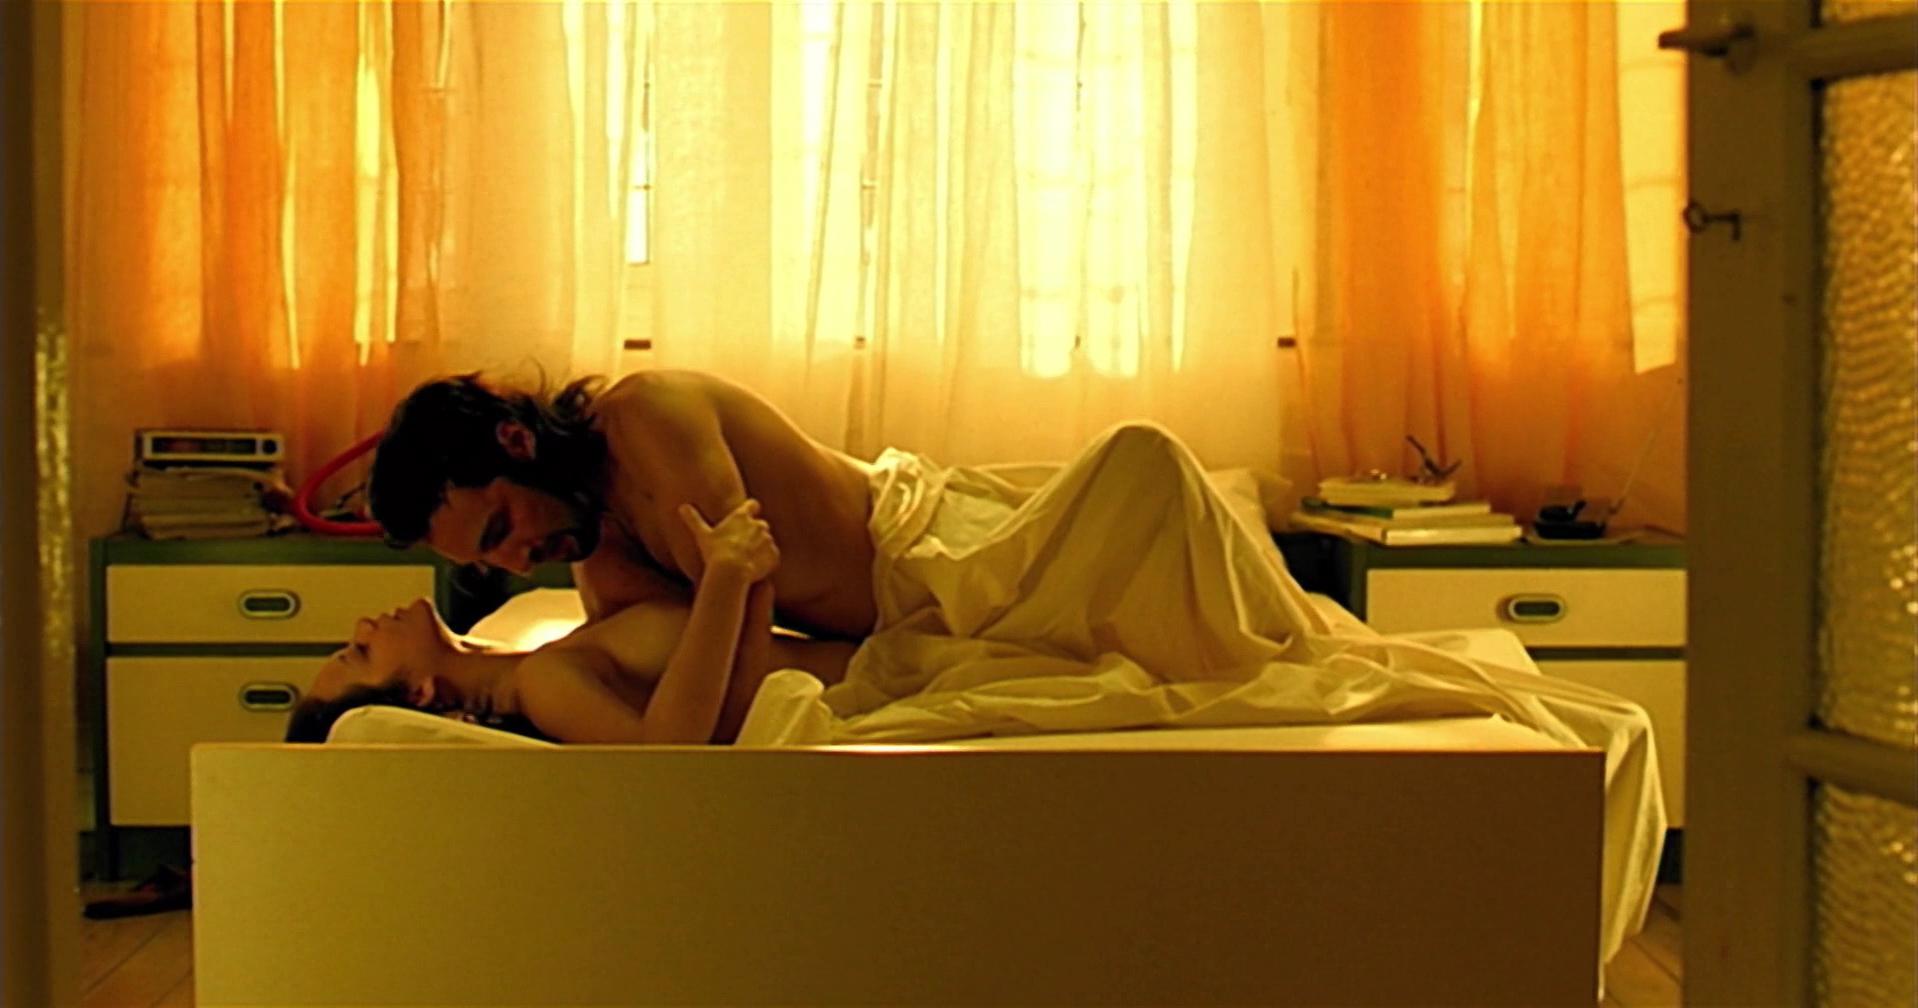 Marion Cotillard nude - Love Me if You Dare (2003)